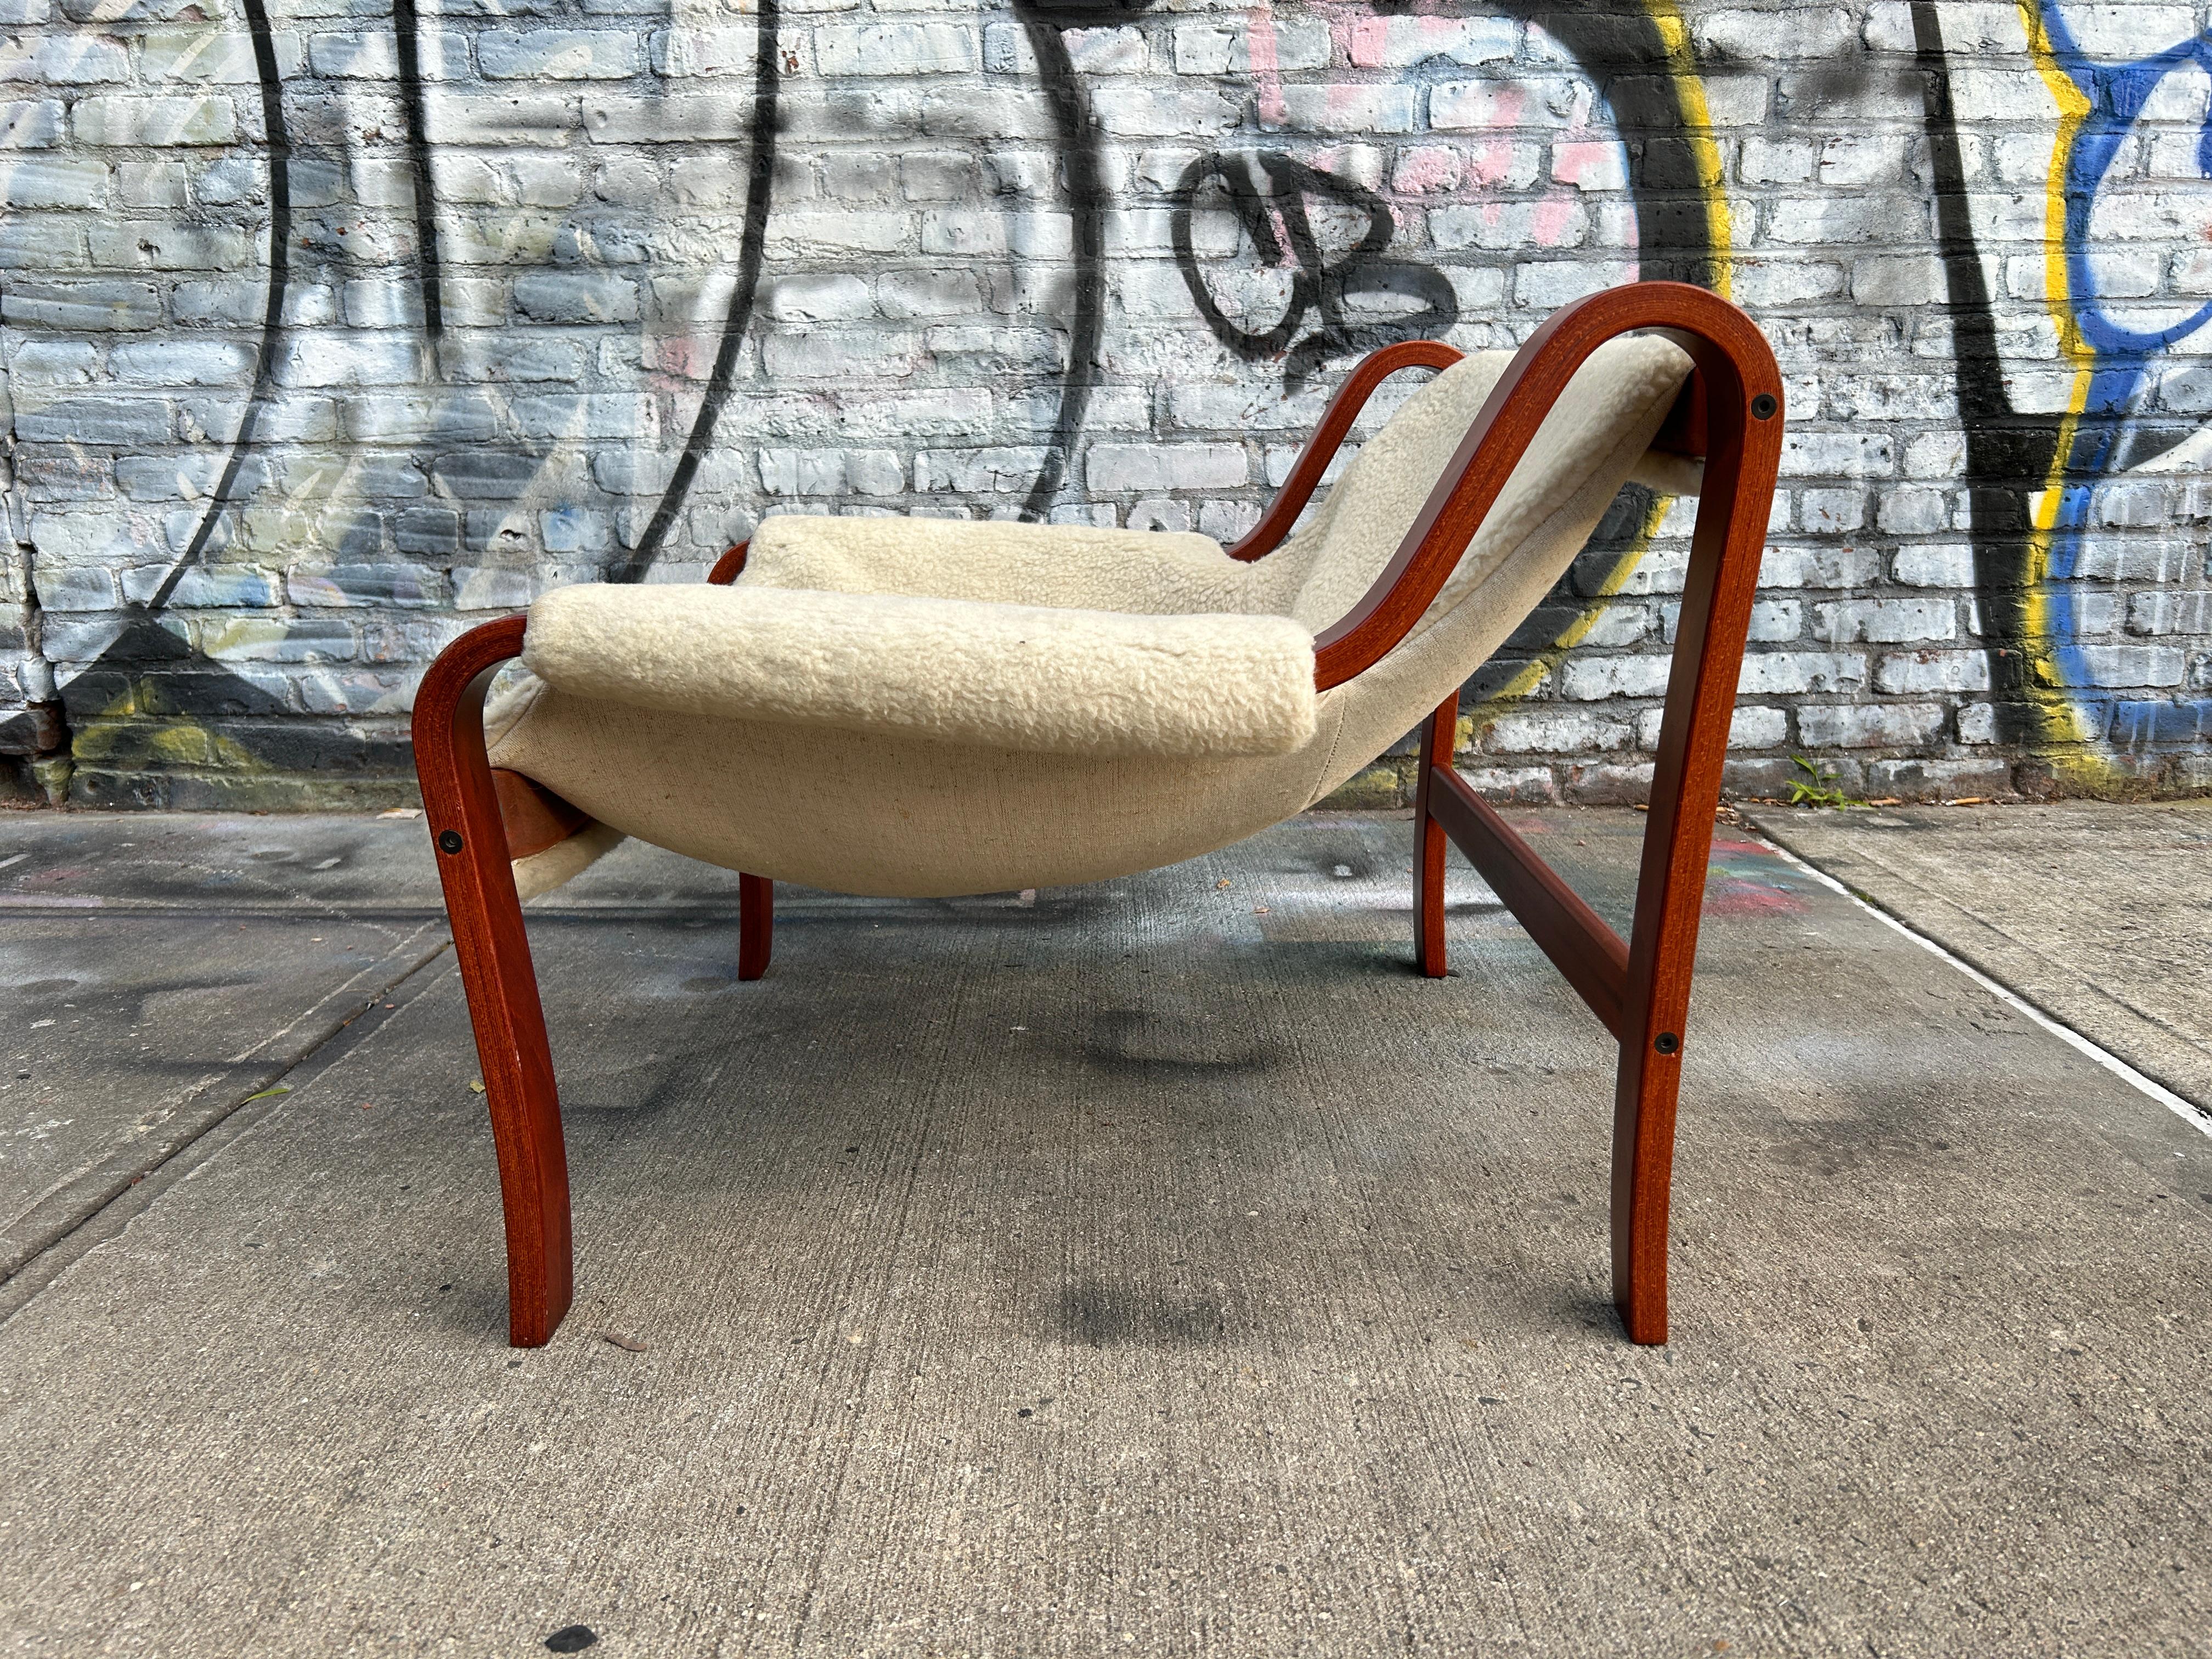 Mid century Scandinavian low bentwood Sherpa lounge chair. Mid century style modern style of westnofa. Bentwood with thick wool Sherpa sling chair. Sits very low. Shows sign of use but good vintage condition. Located in Brooklyn NYC

4 available.